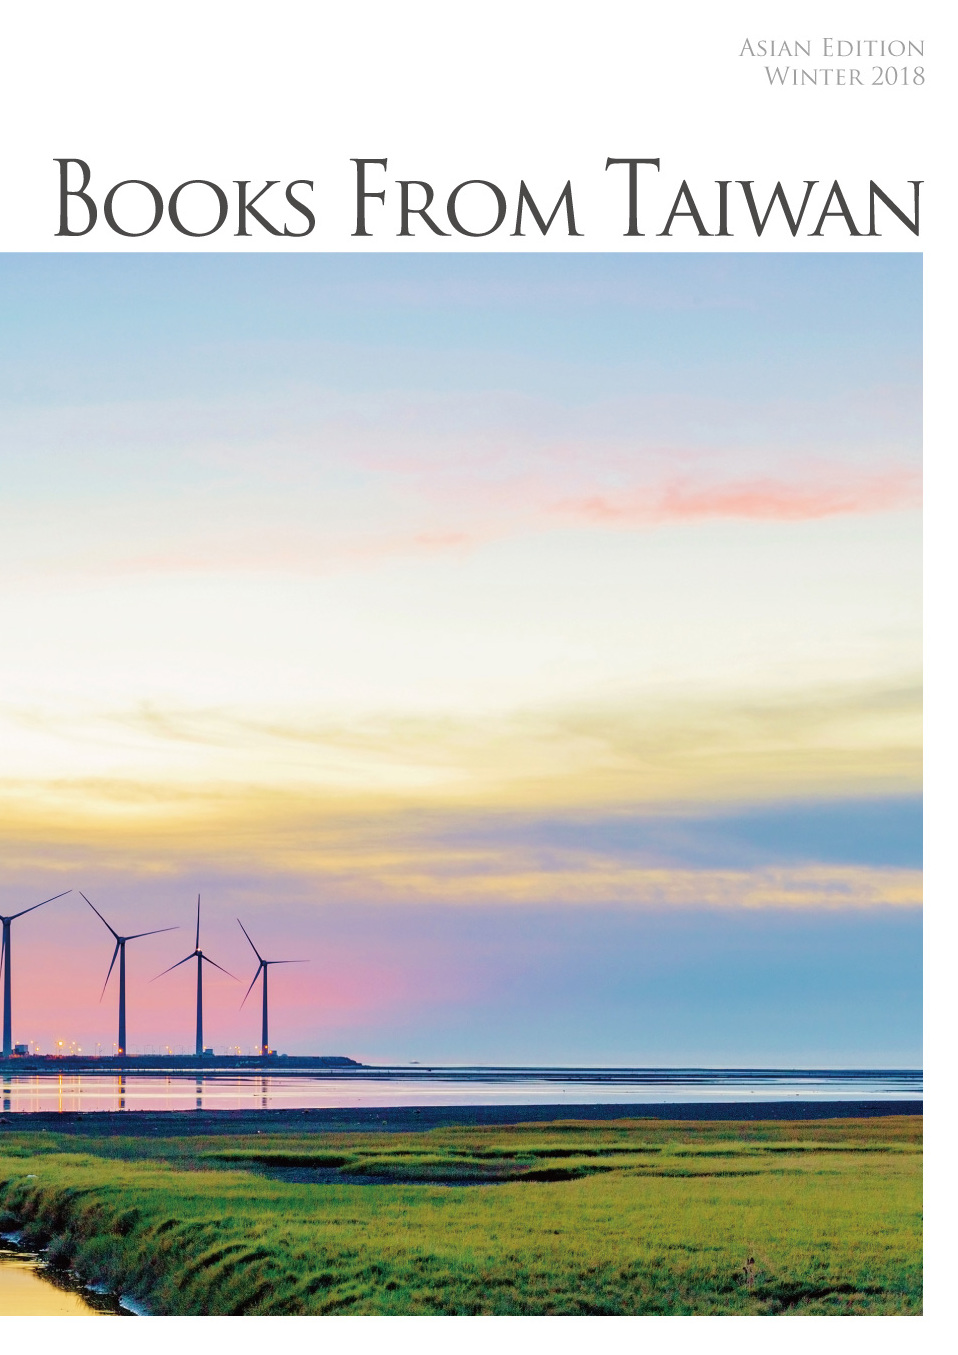 Books from Taiwan Asian Edition 2018